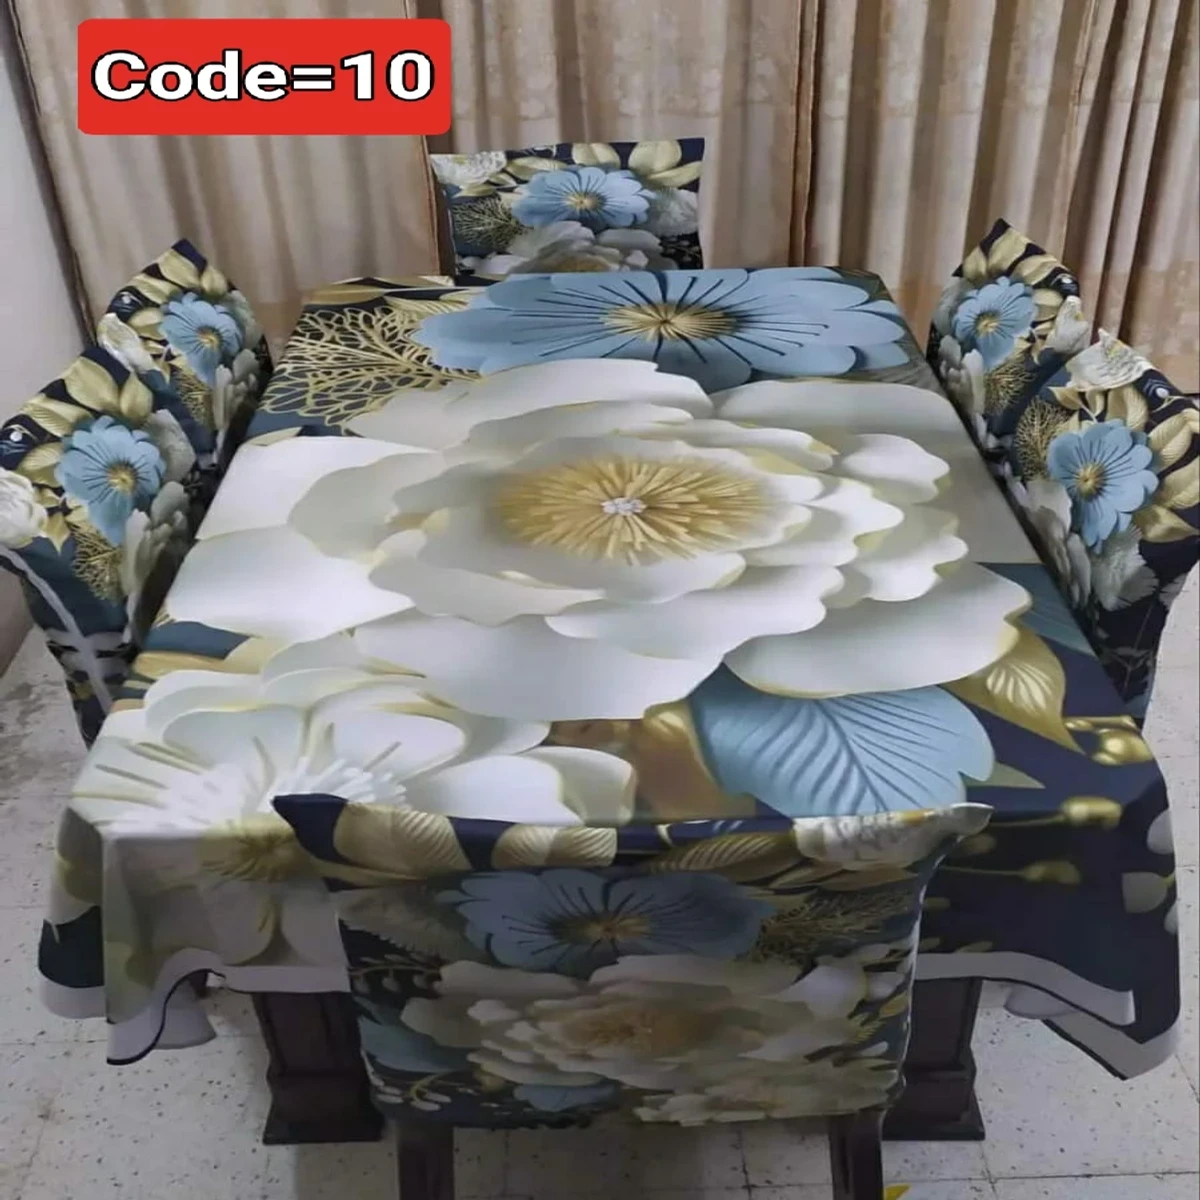 3D Pint Dining Table and Chair Cover Code=10